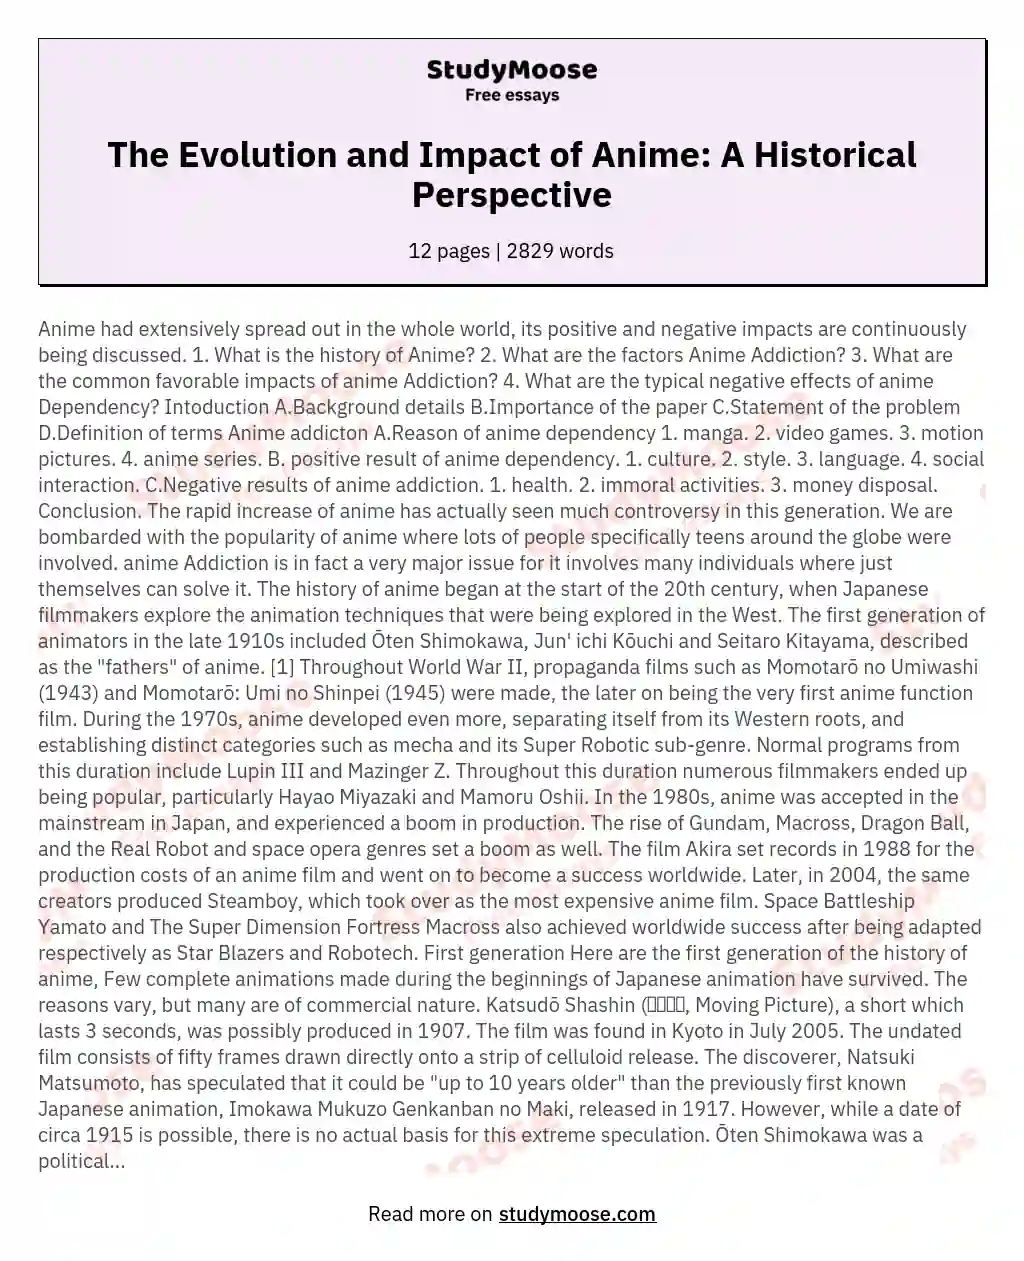 The Evolution and Impact of Anime: A Historical Perspective essay